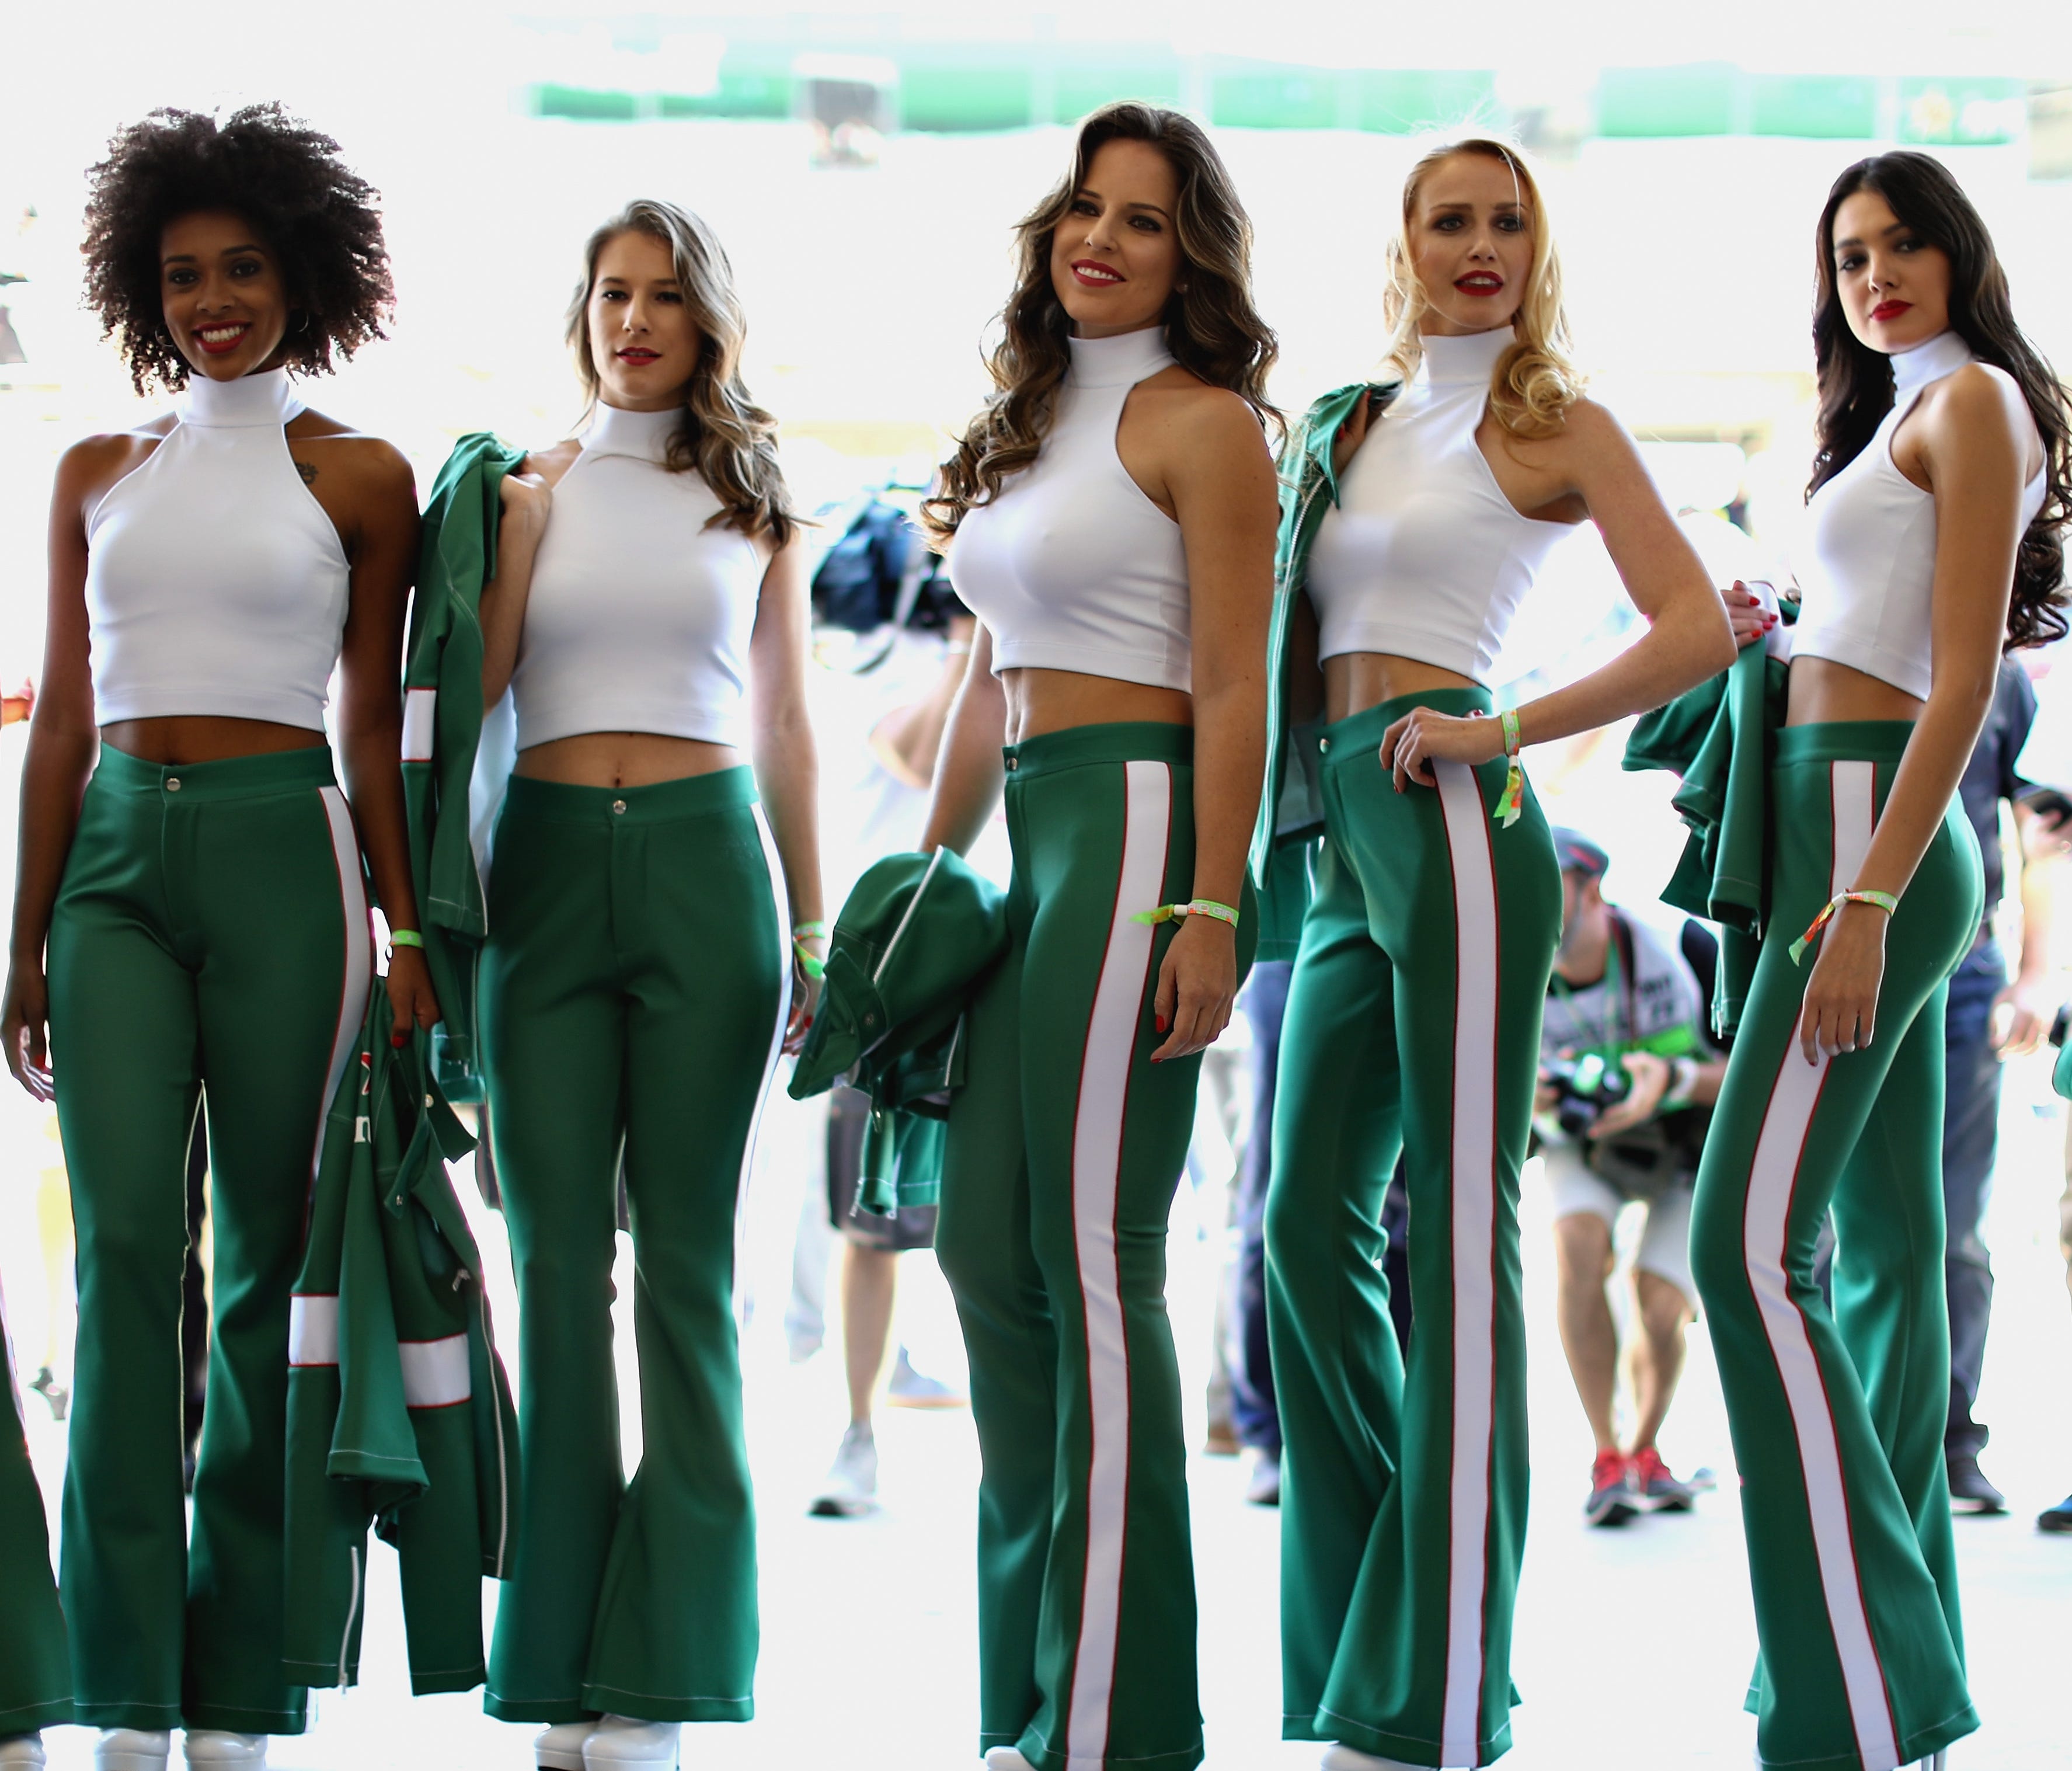 Formula One grid girls pose for a photo before the 2017 Brazilian Grand Prix.